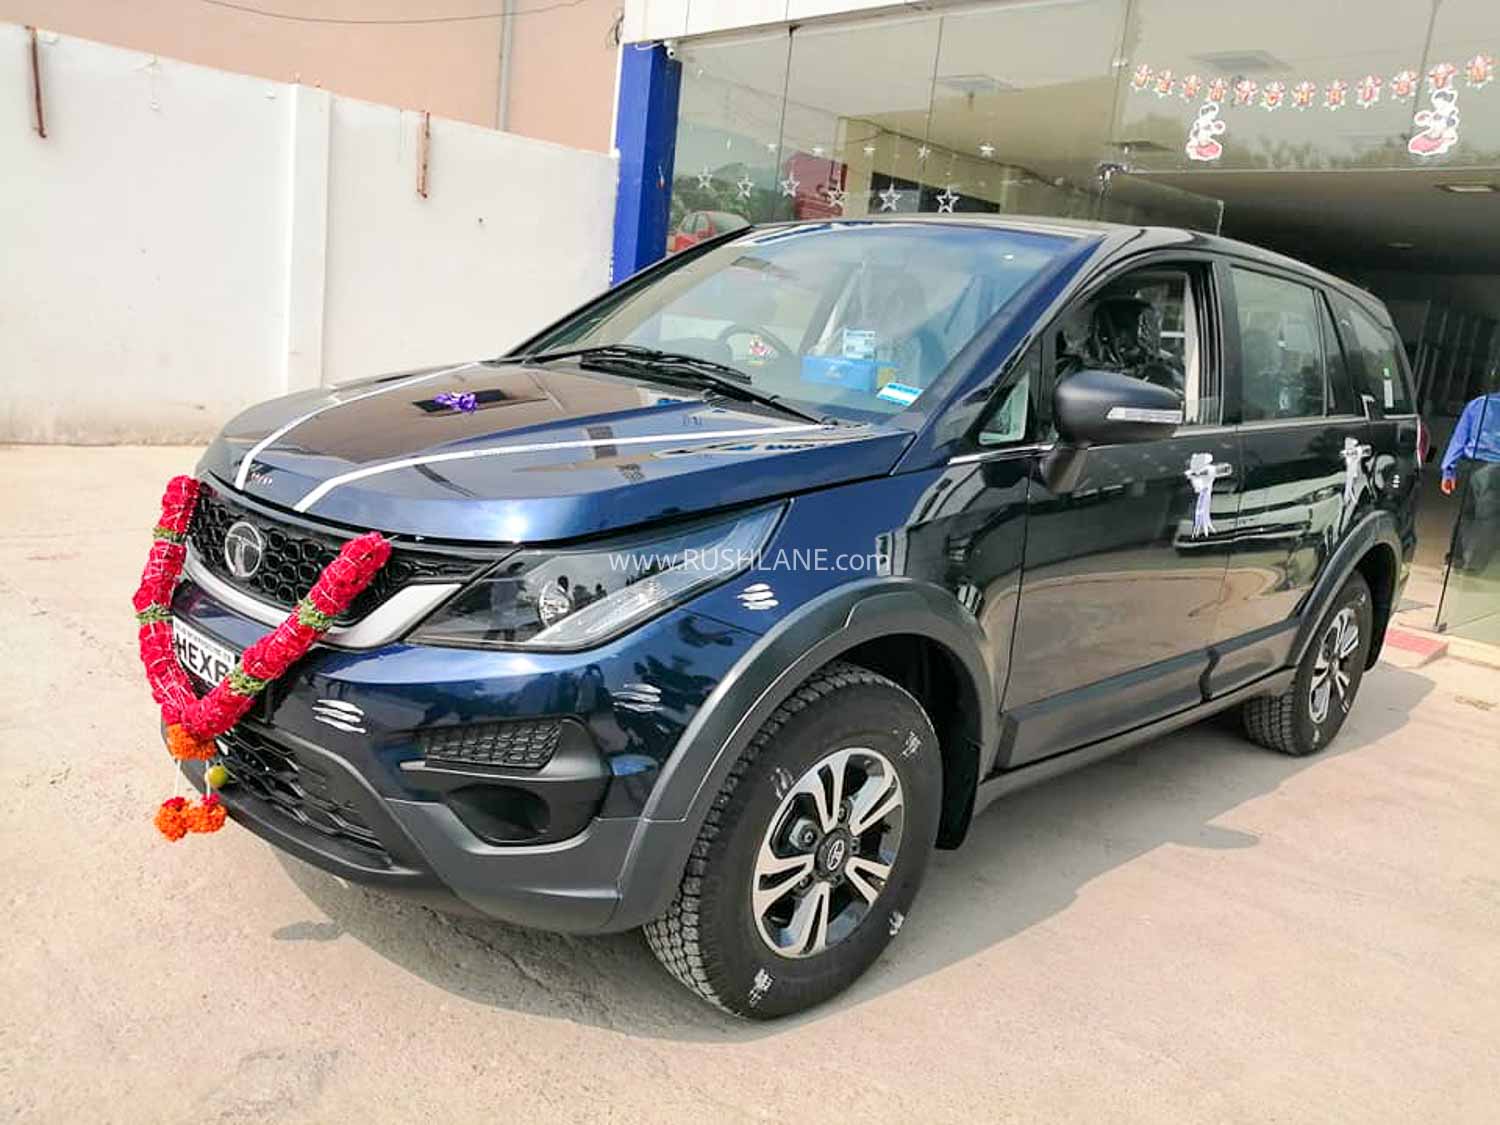 New Tata Hexa car delivery to owner.